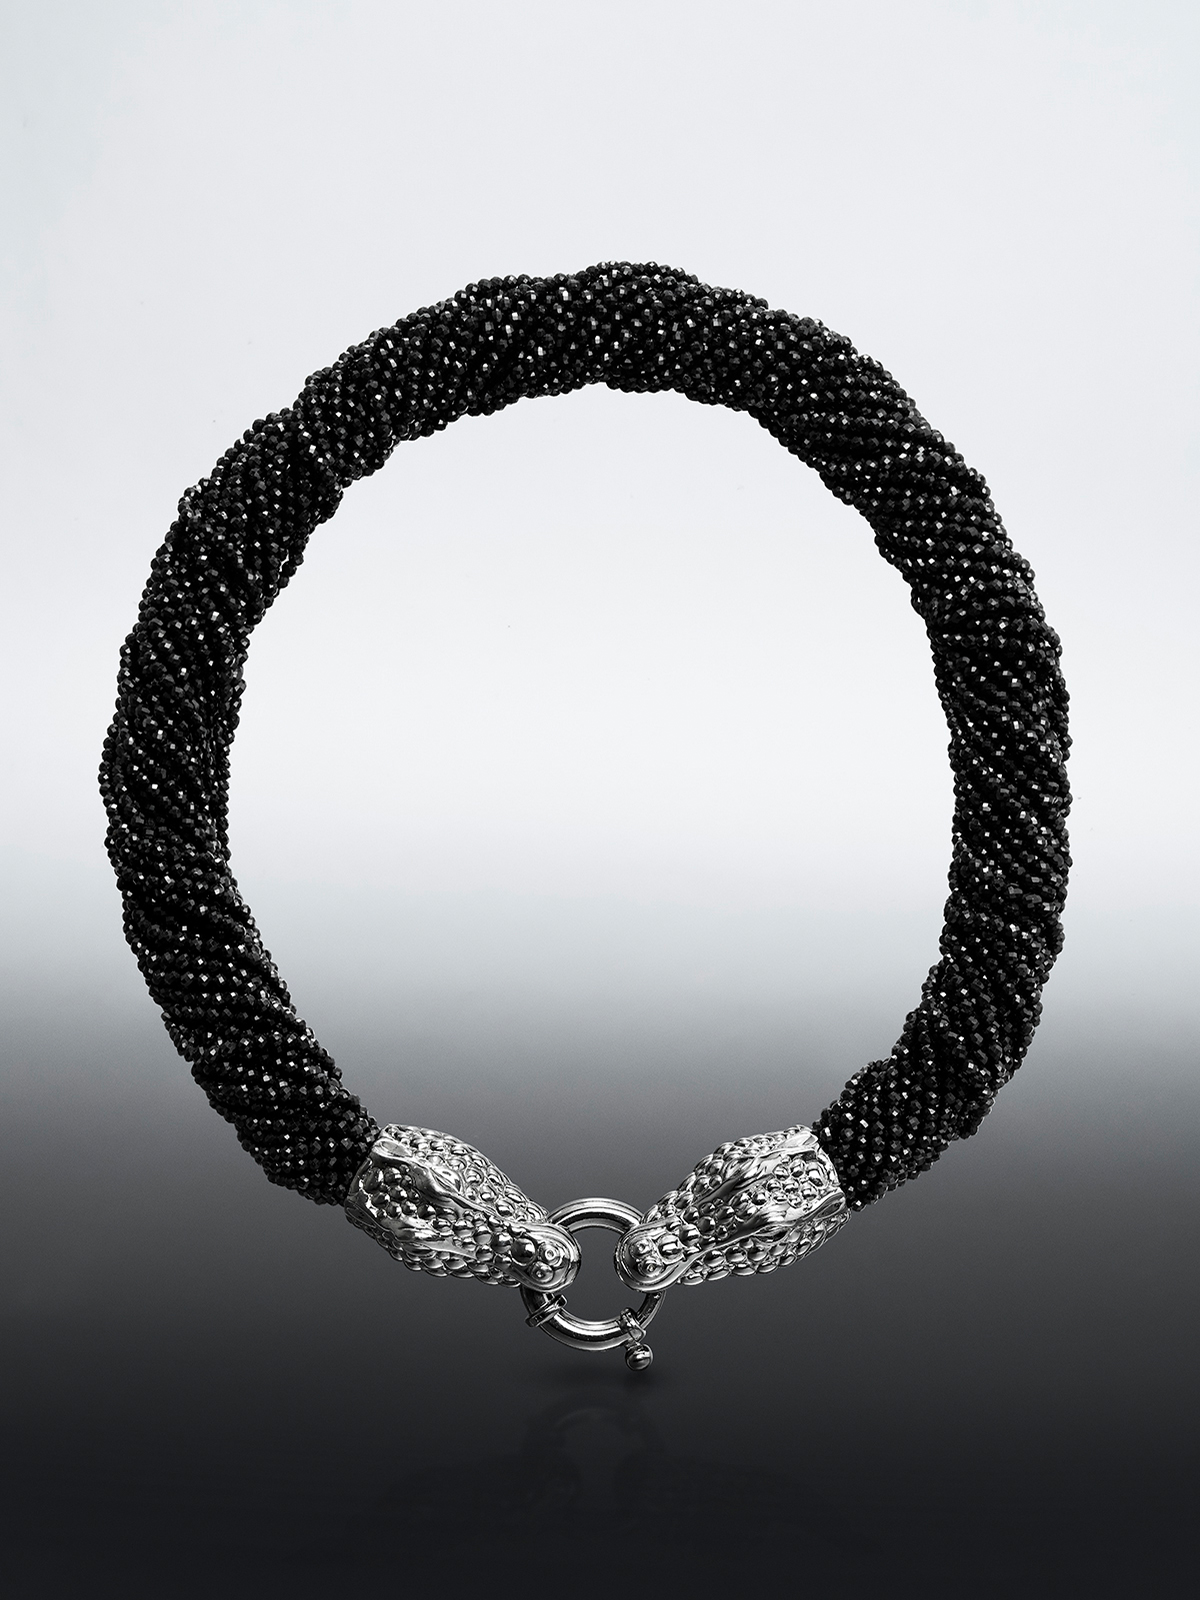 925 silver necklace shaped like crocodile and black spine.